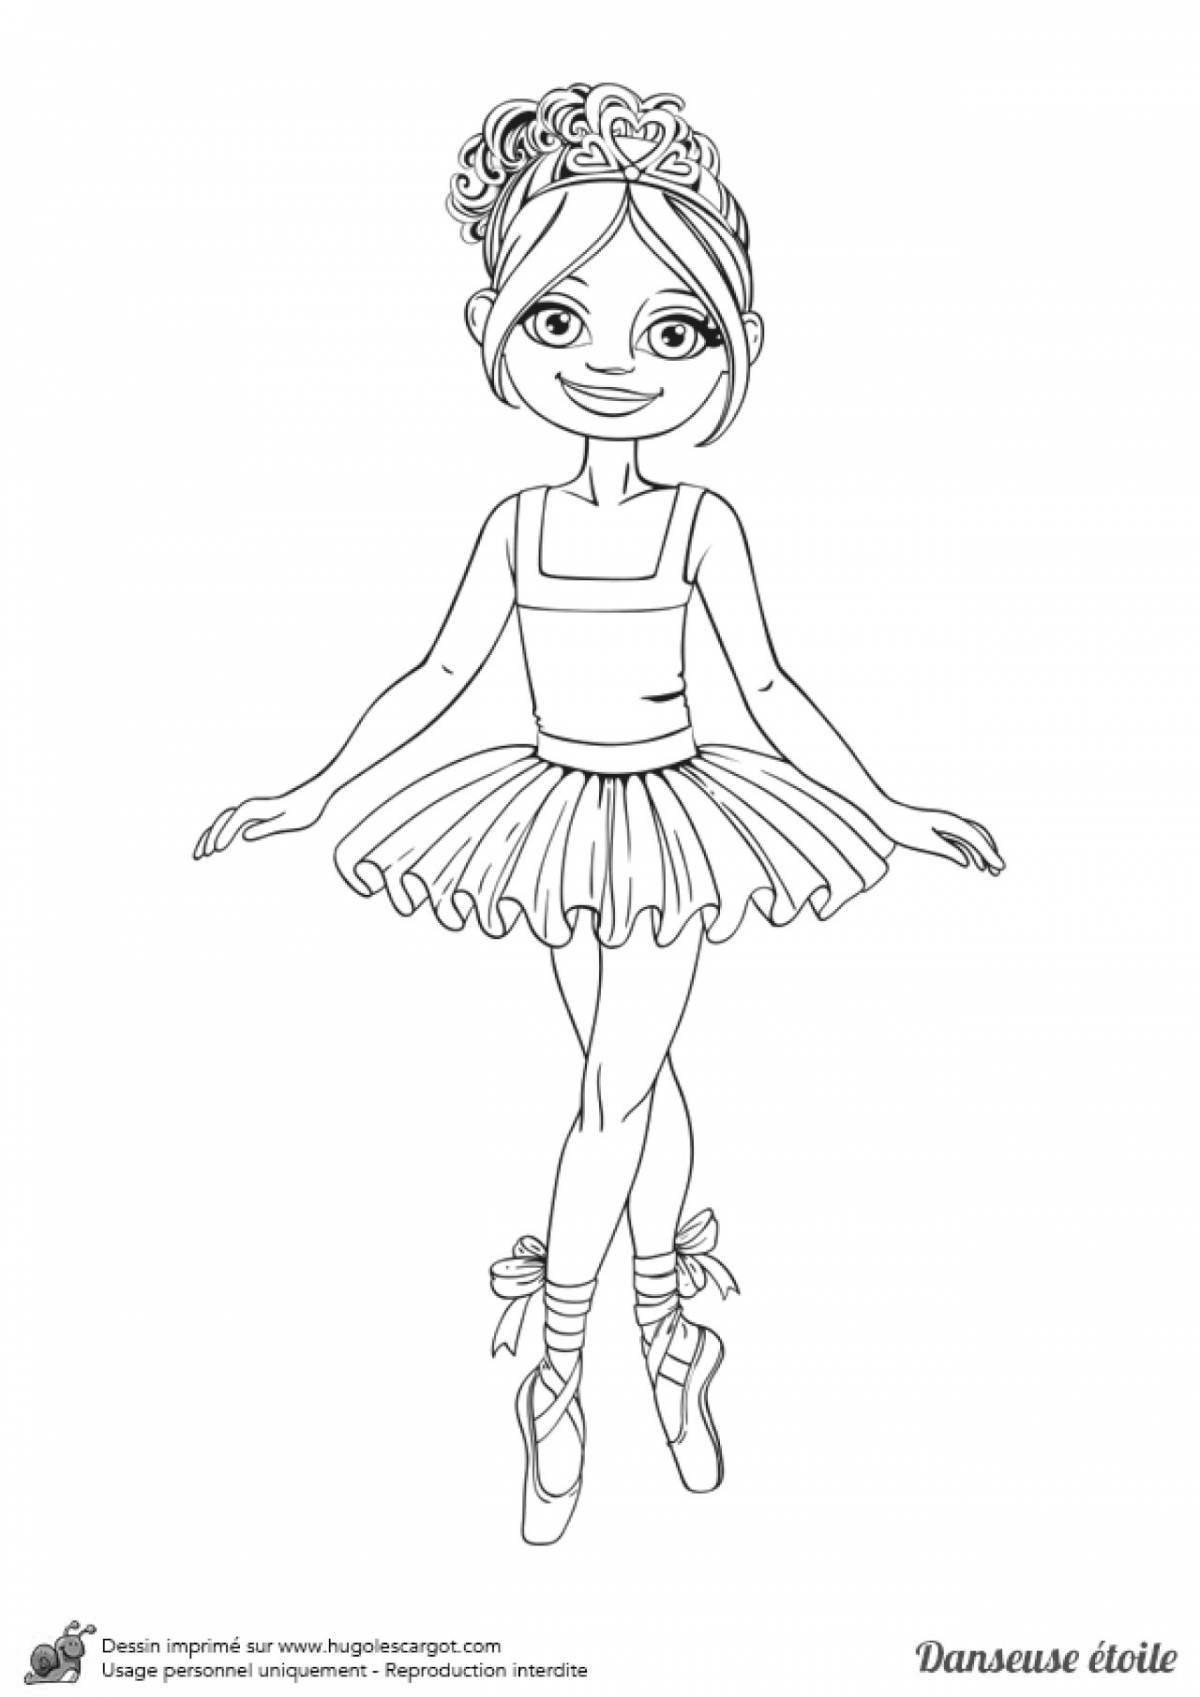 Coloring page funny ballerina